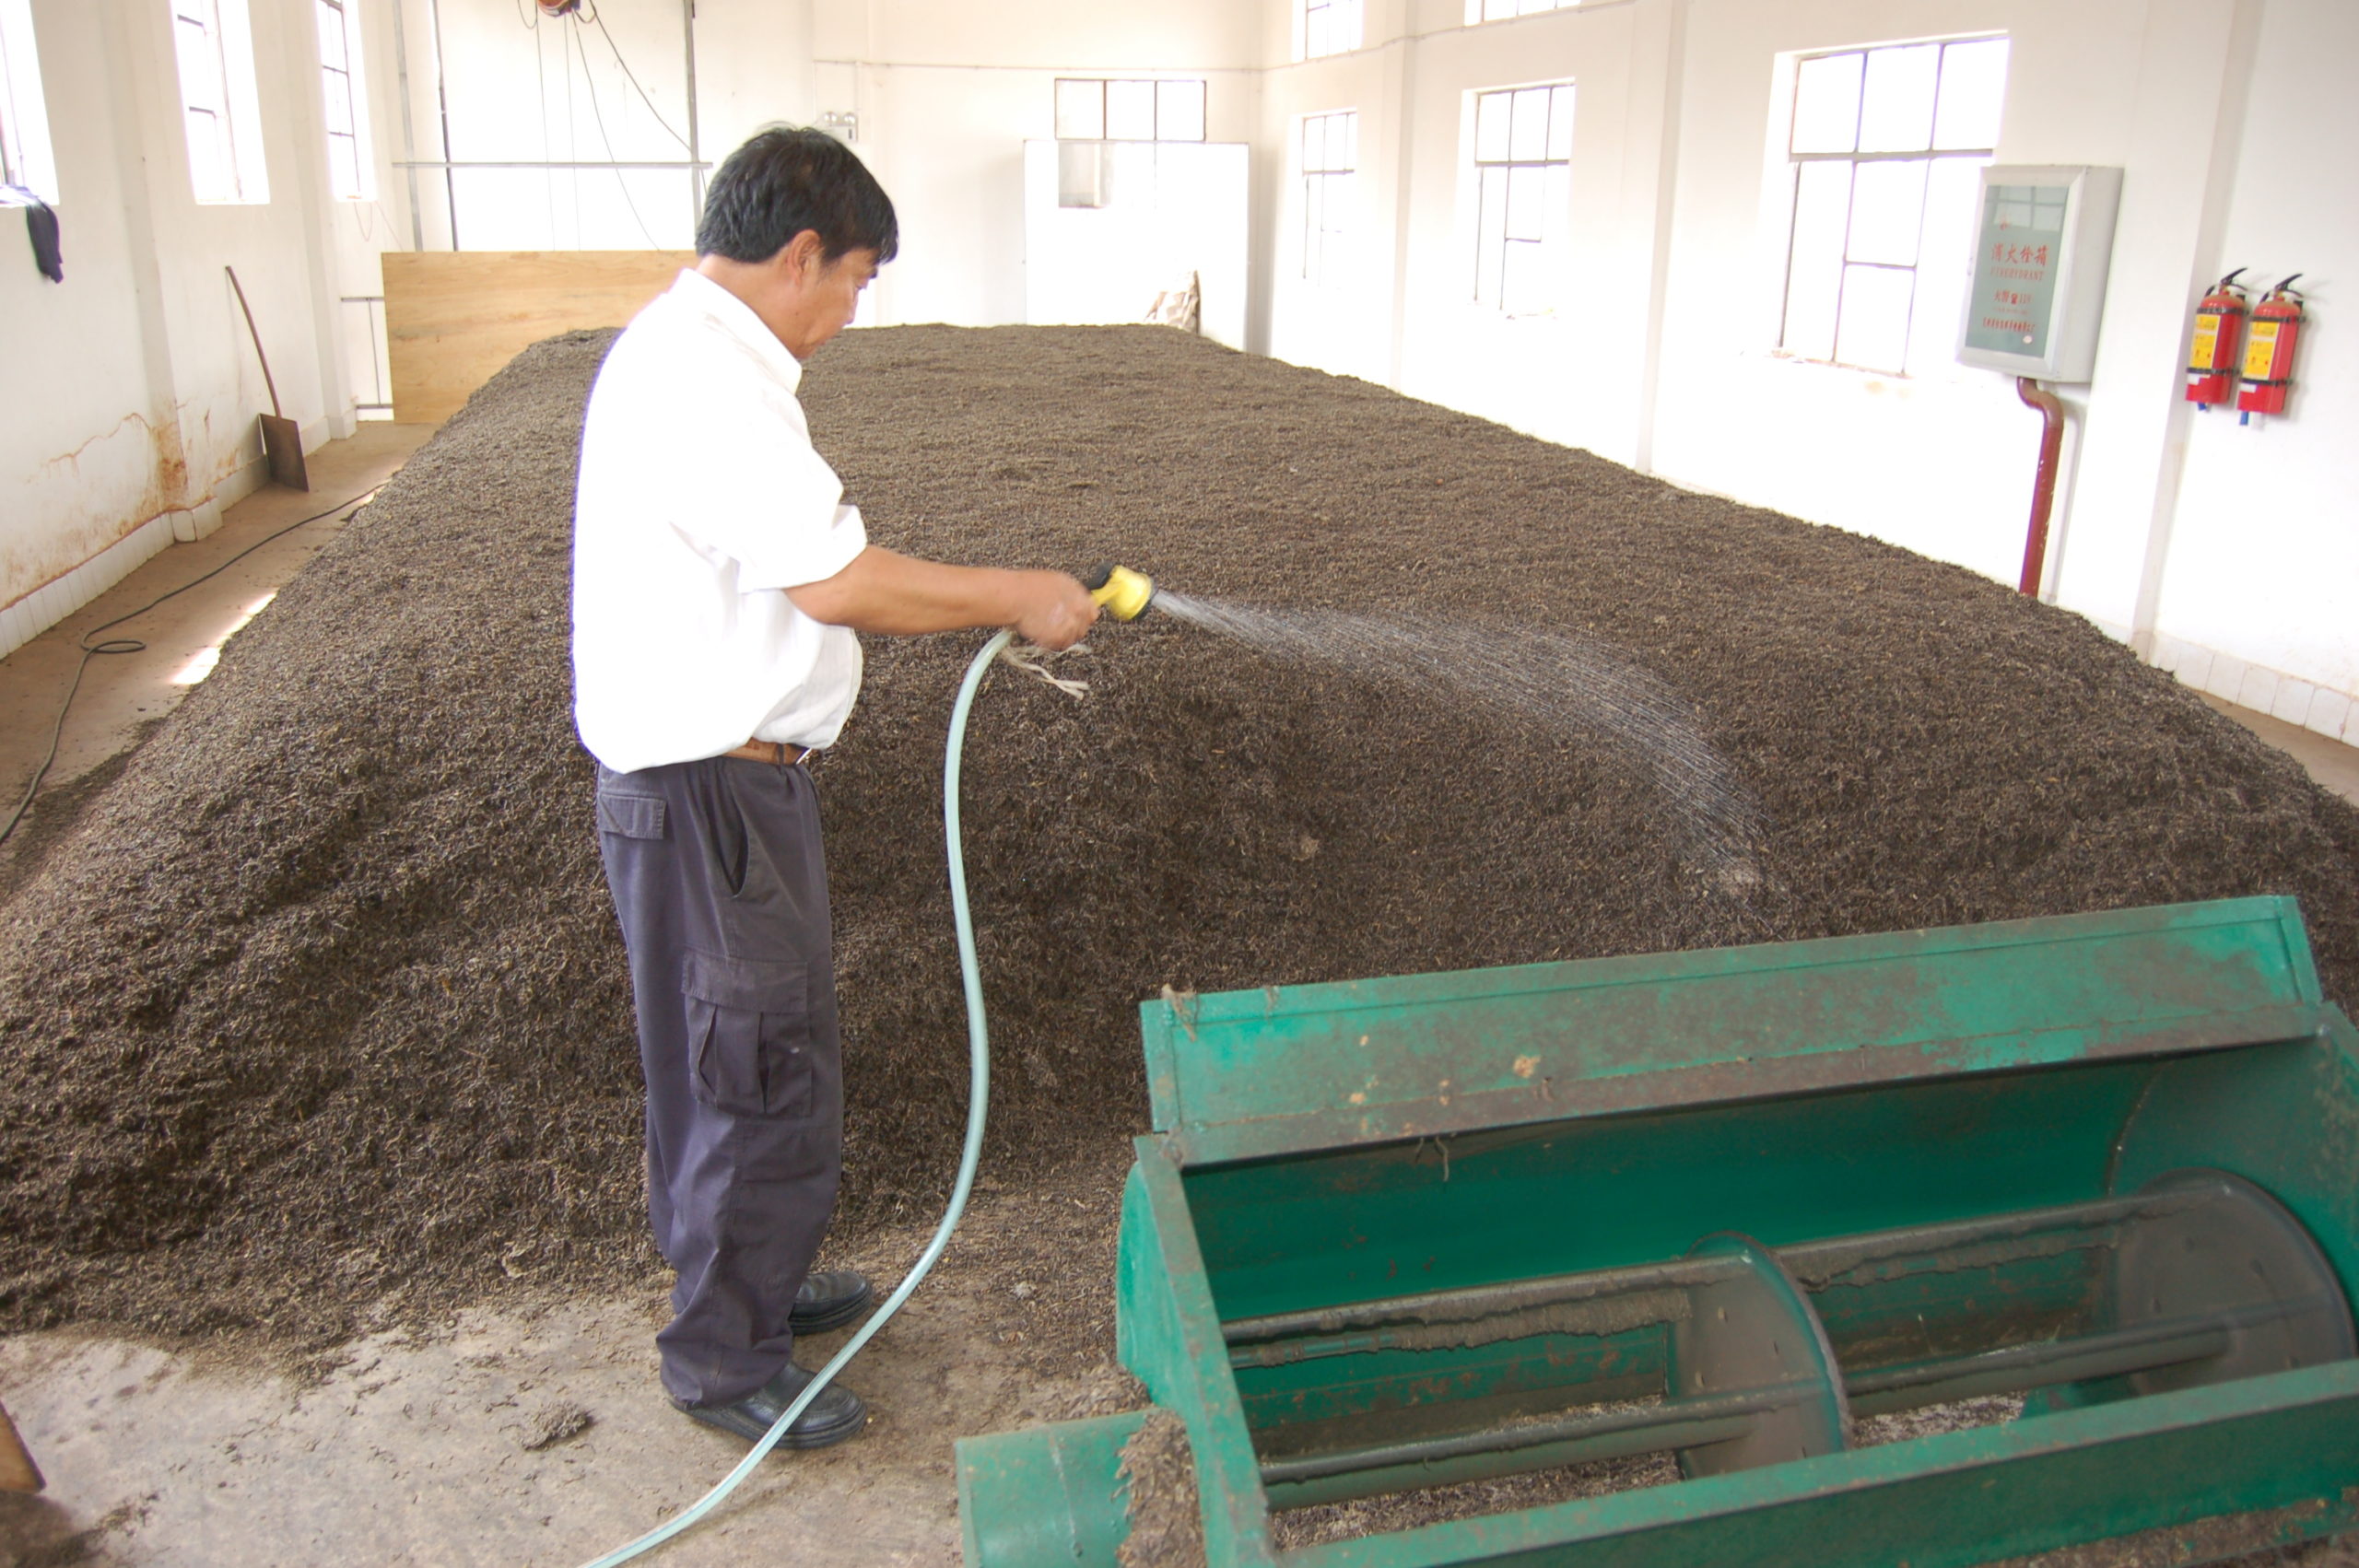 A person spraying water from a hose over a huge pile of tea leaves.